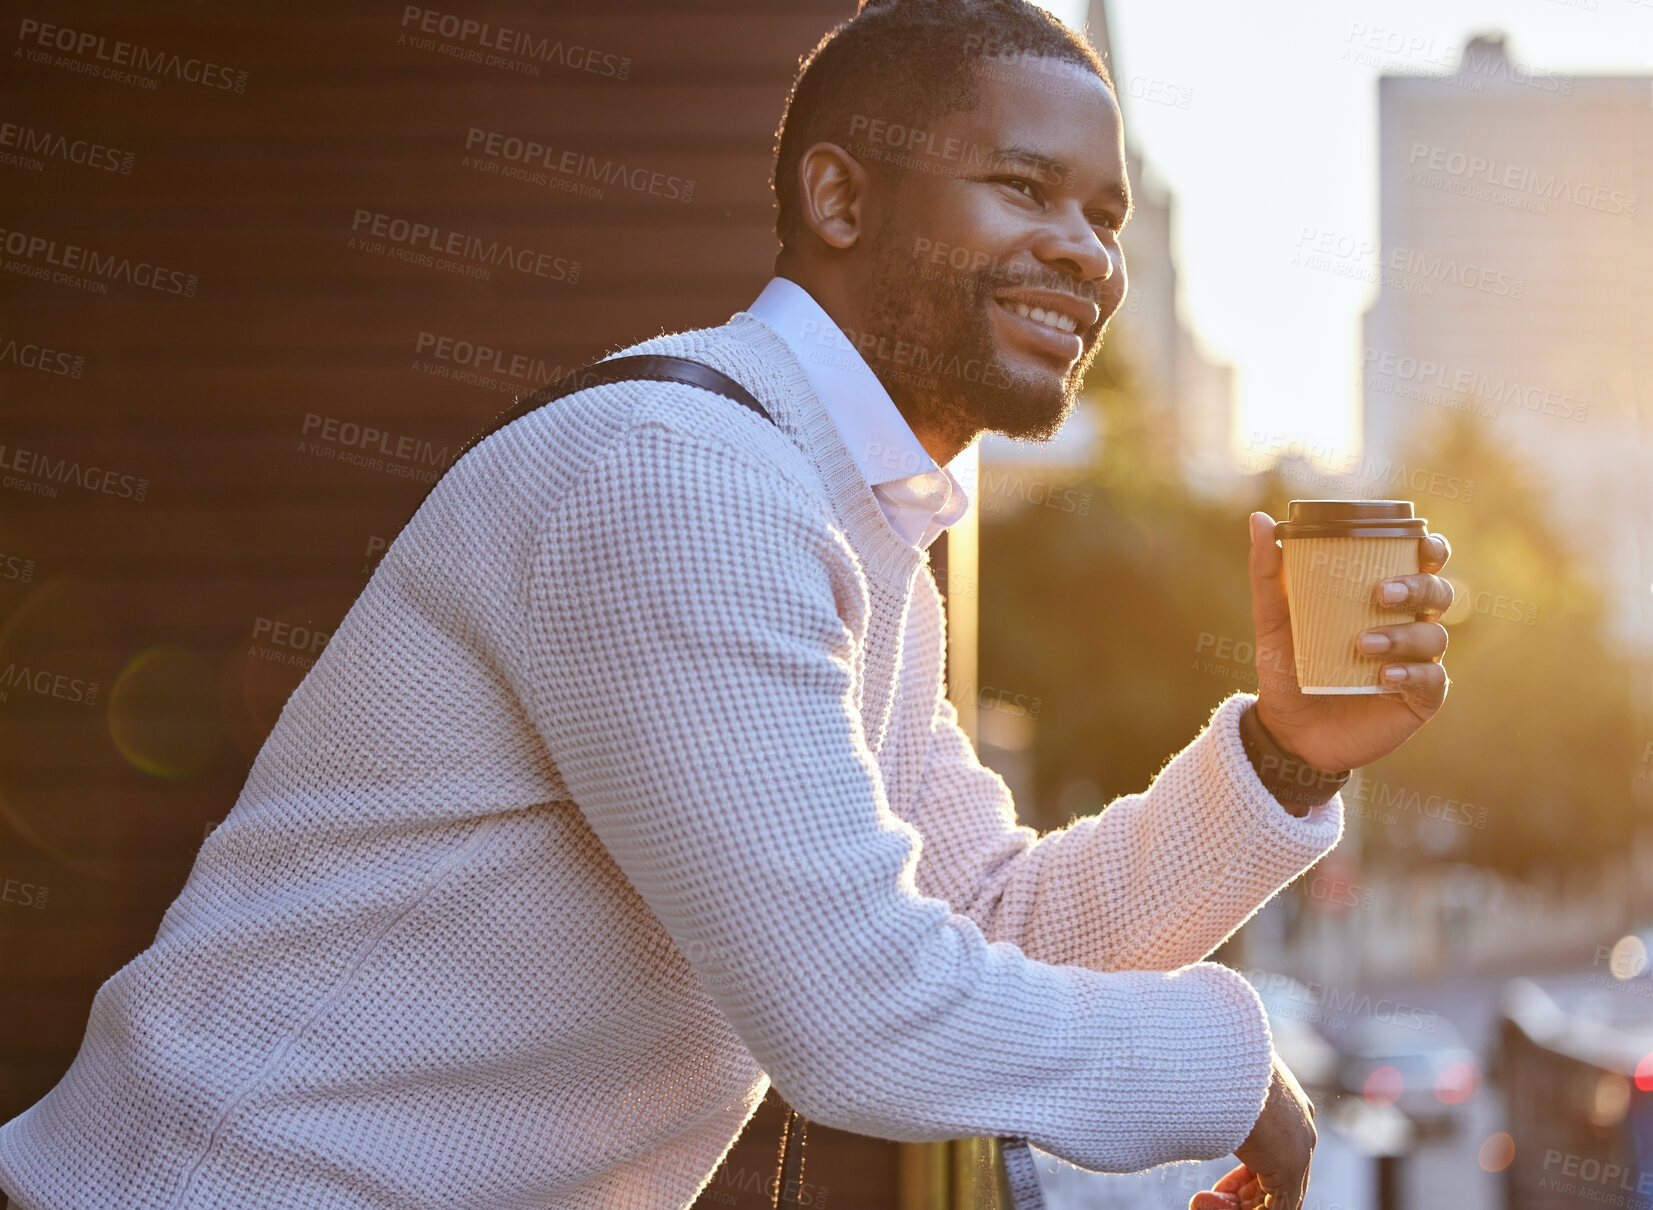 Buy stock photo Shot of a young businessman drinking coffee while standing on the balcony of an office